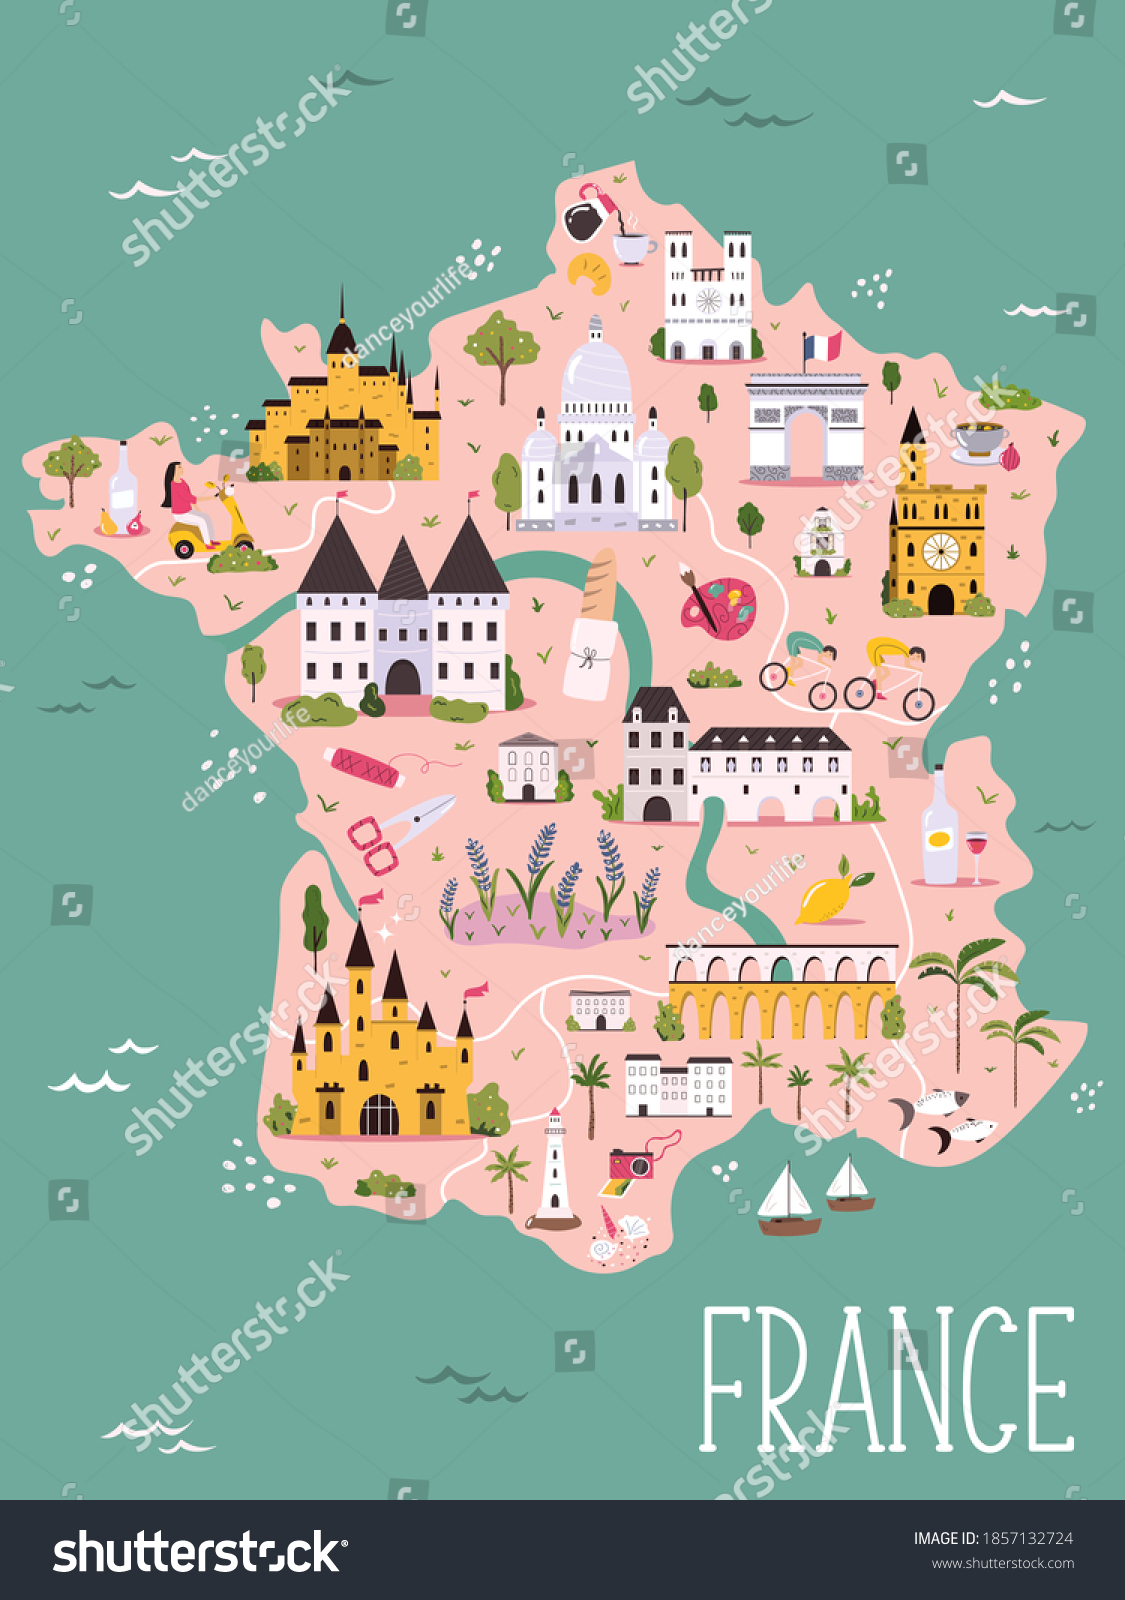 SVG of France hand drawn vector map with famous symbols, landmarks of the country. Design, banner for travel guides, prints, souvenirs svg